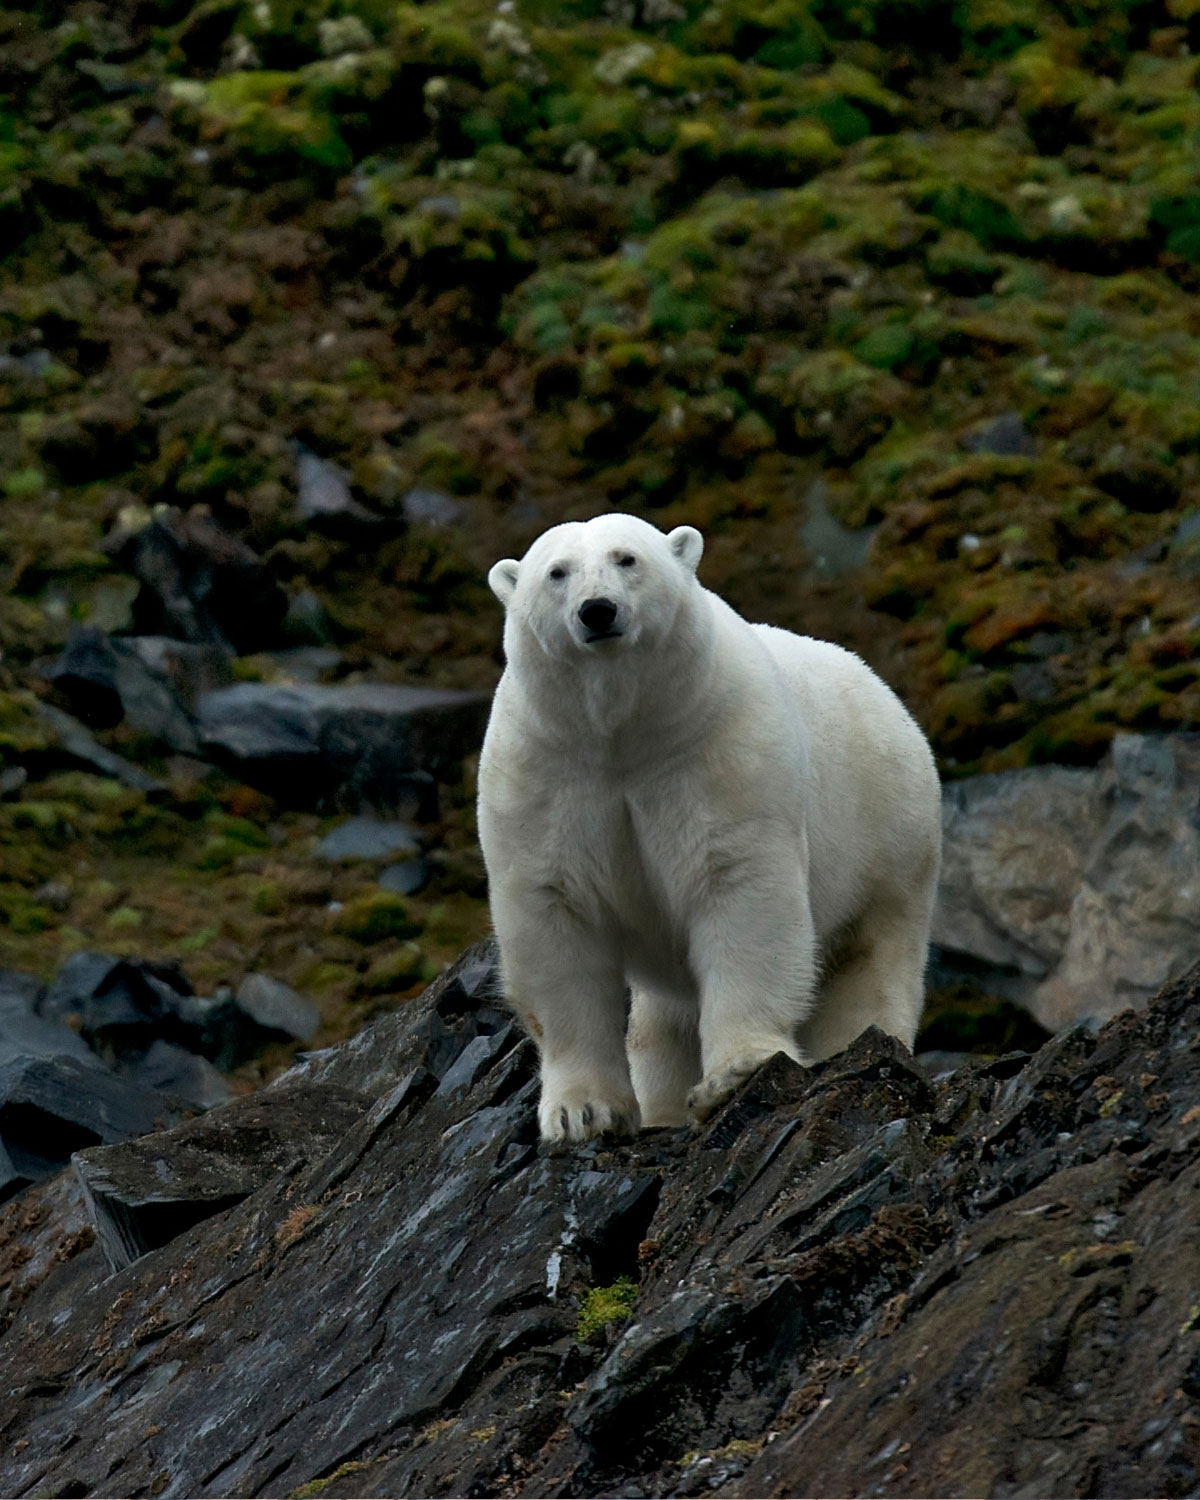 A polar bear stands on a rock, staring at the camera, with mossy grey rocks in the background